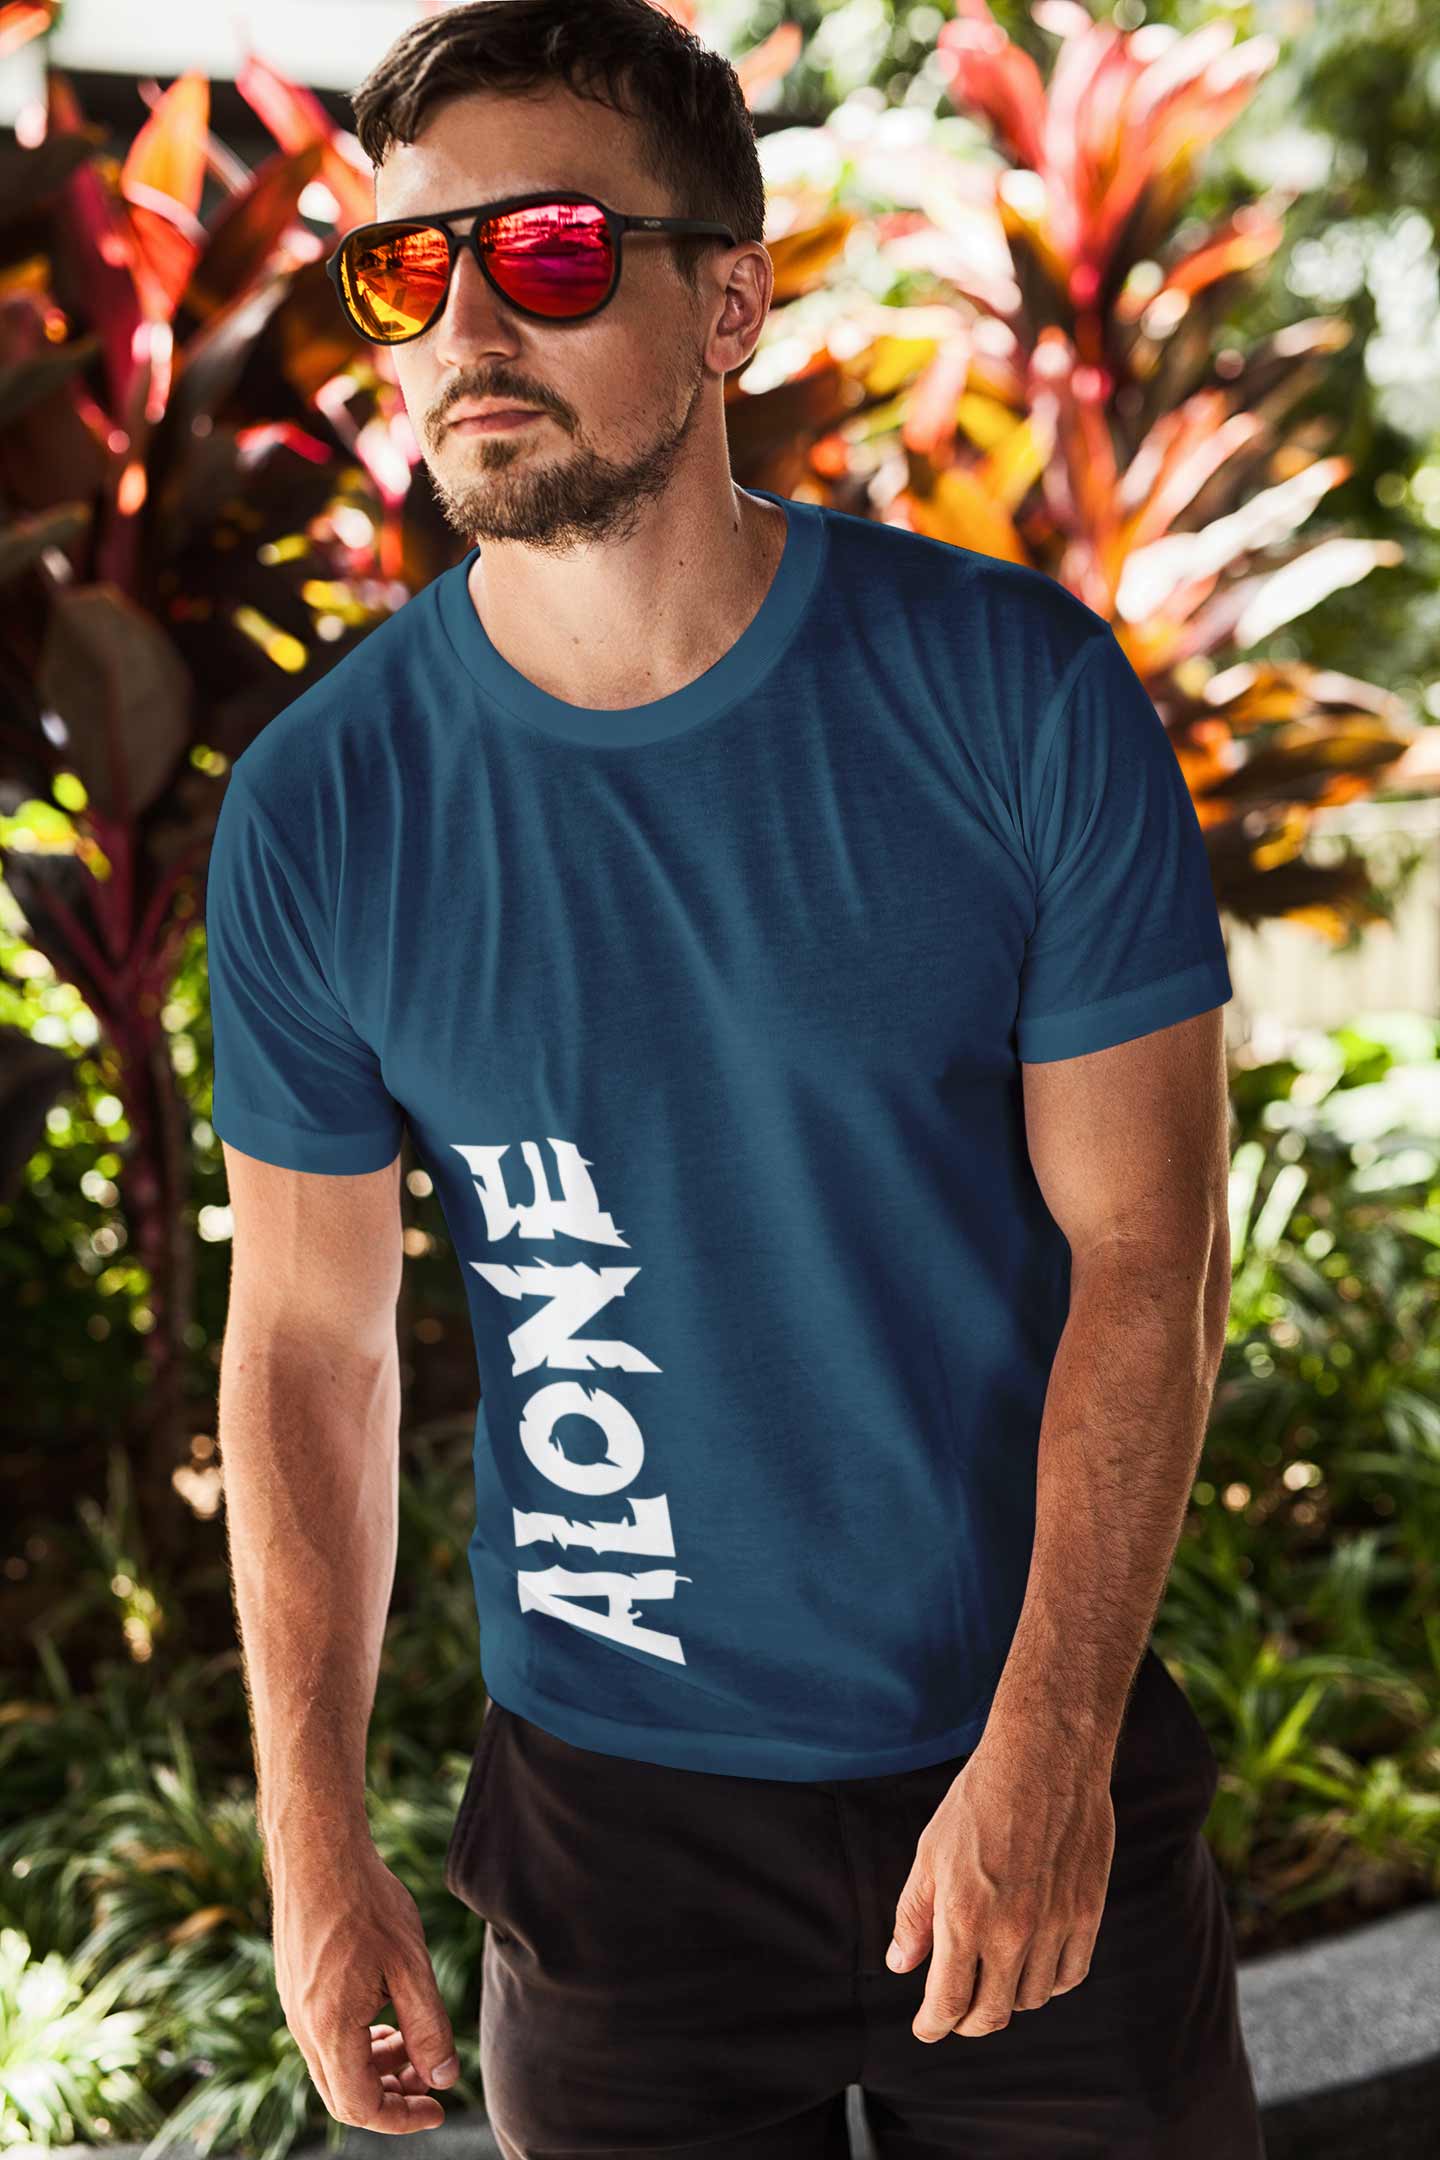 Alone T-Shirts For Men || Navy Blue || Stylish Tshirts || 100% Cotton || Best T-Shirt For Men's